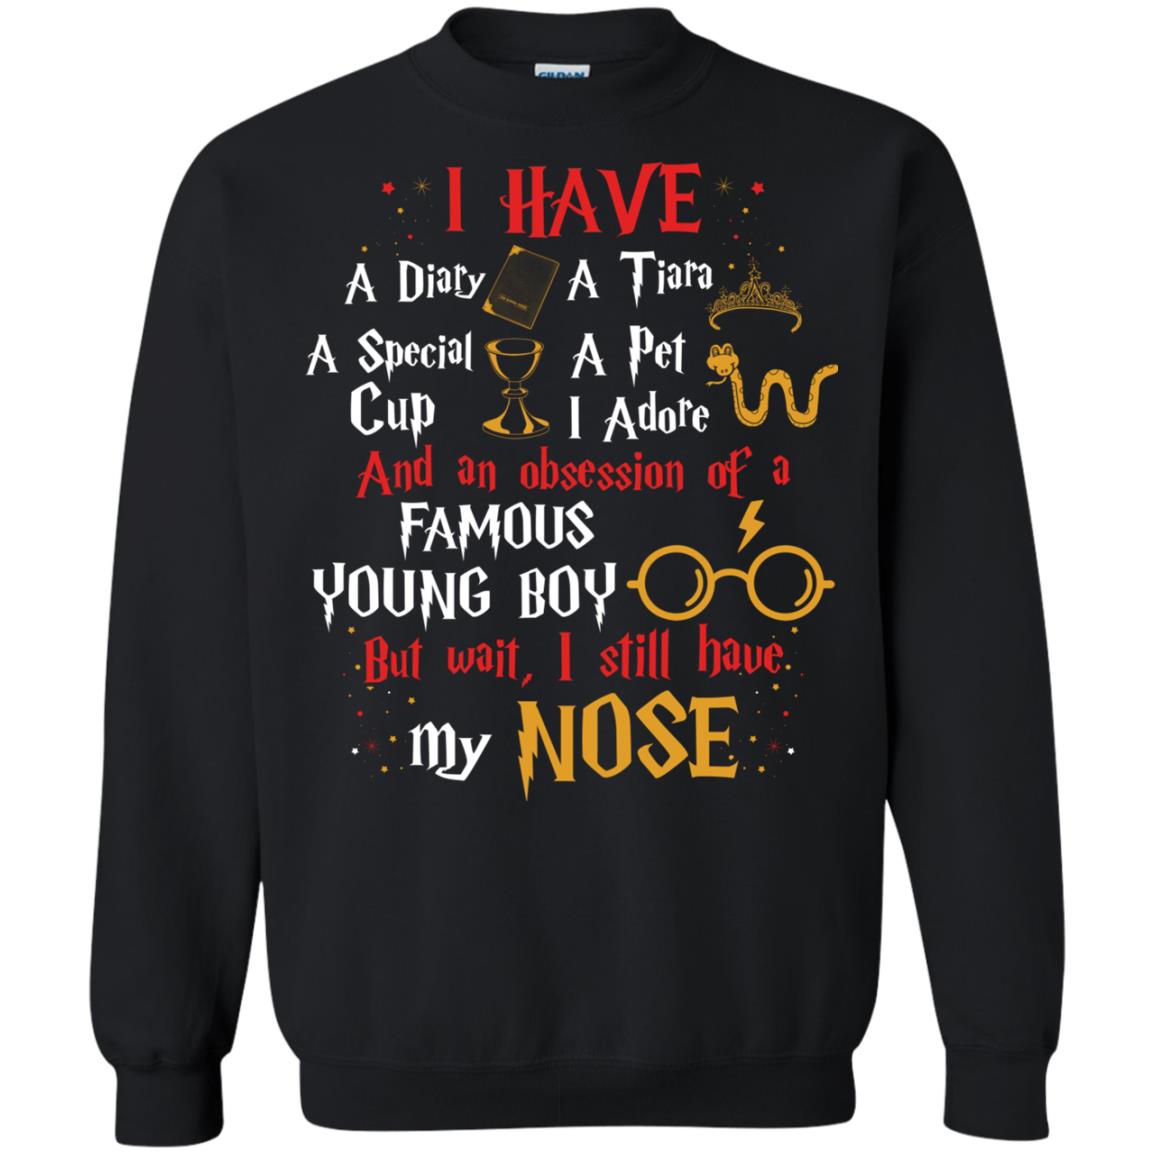 I Have A Diary, A Tiara, A Special Cup, A Pet I Adore And An Obsession Of A Famous Young Boy Harry Potter Fan T-shirtG180 Gildan Crewneck Pullover Sweatshirt 8 oz.